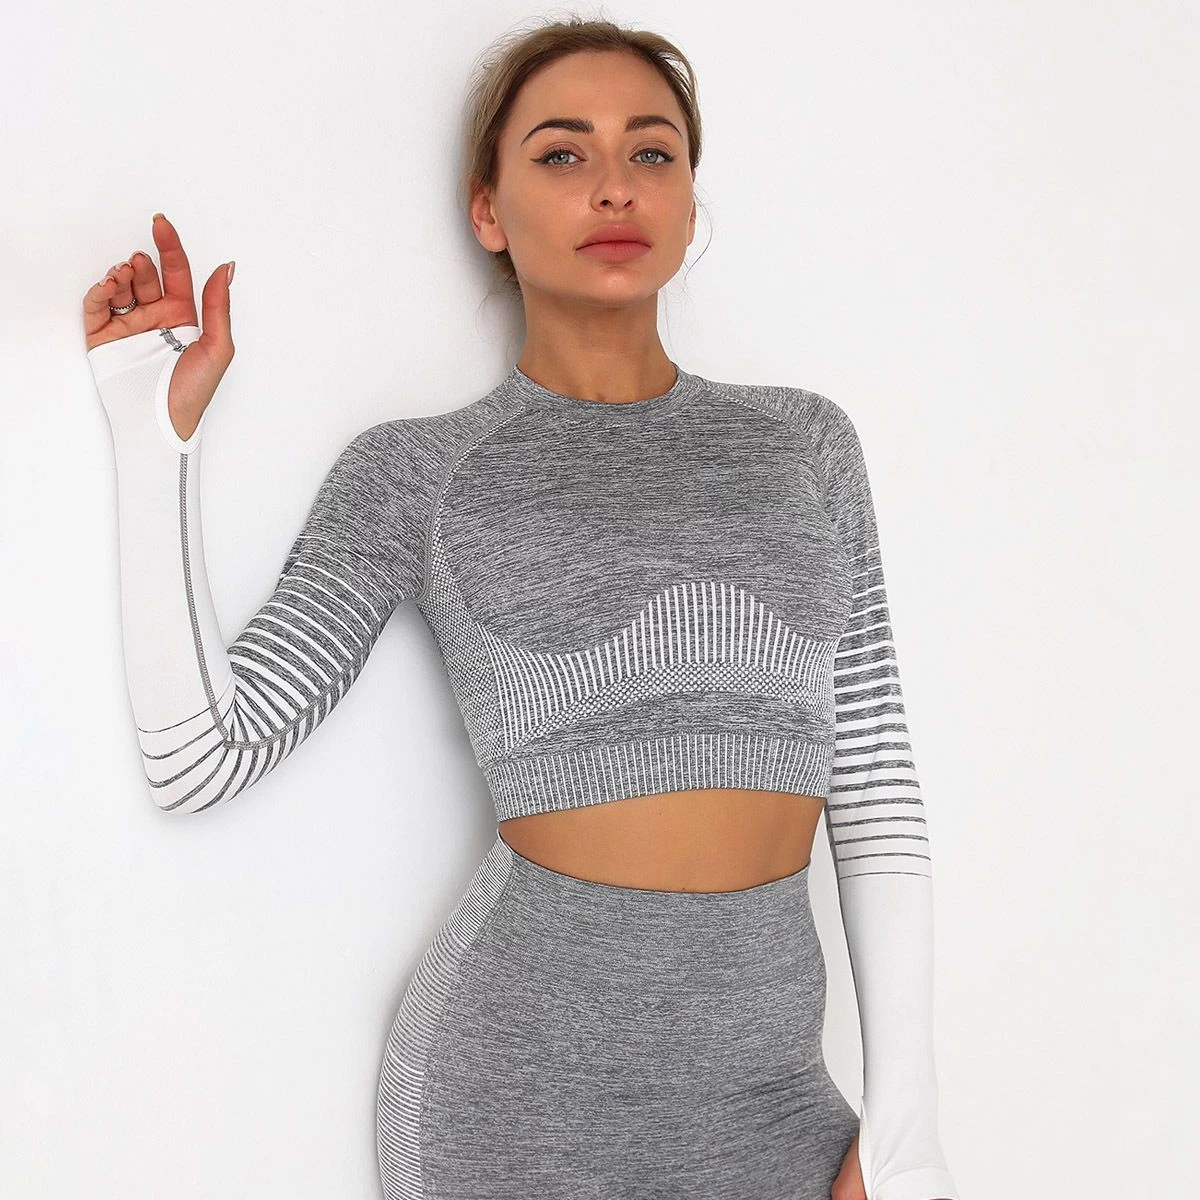 S-SHAPER Workout Seamless Yoga Tops Supplier for Women Compression Long Sleeve Fitness Athletic Yoga Sports Shirt With Thumb Hole